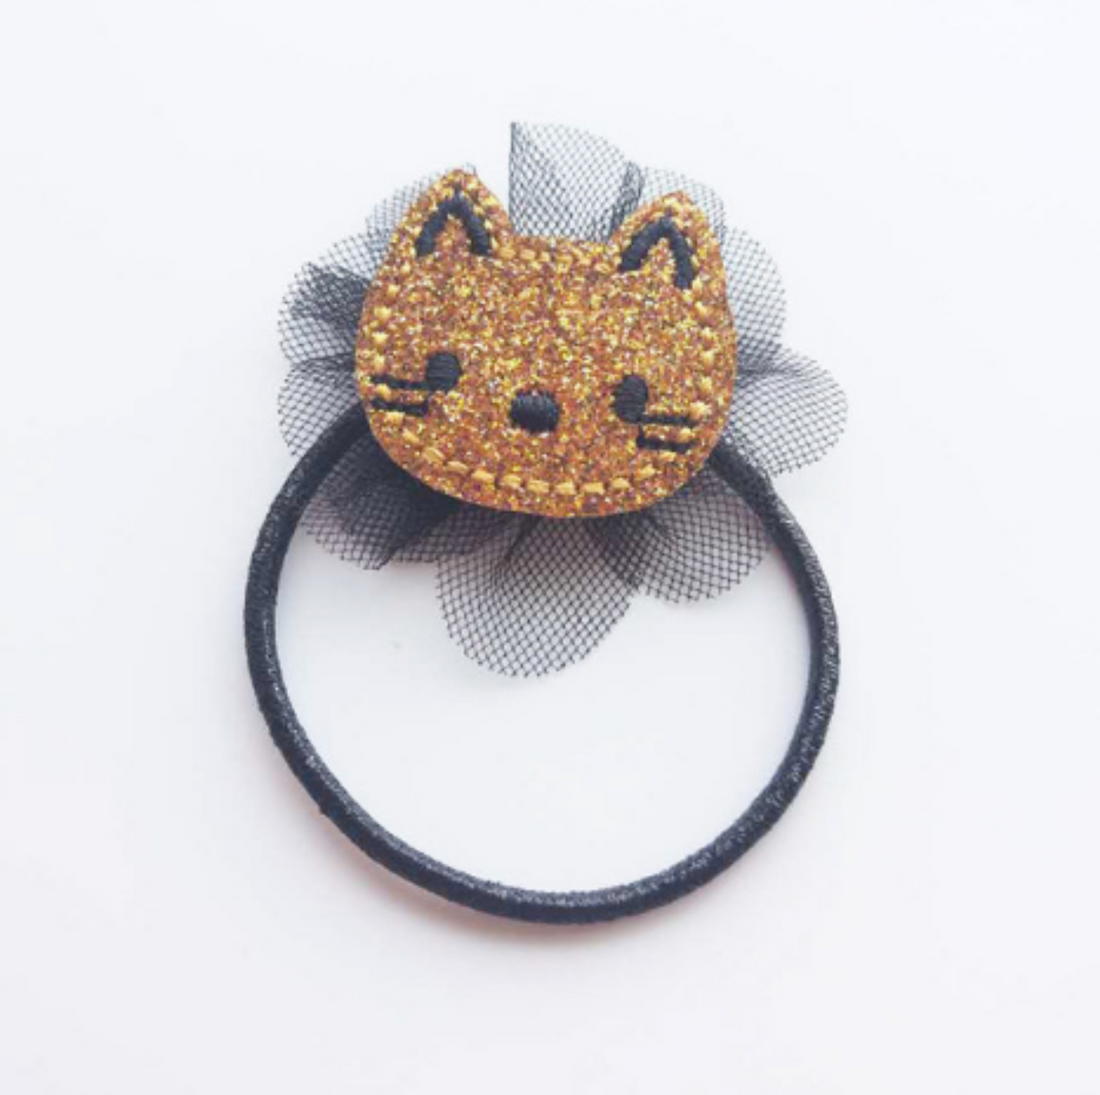 Cute baby clip accessories with kitty cat motif